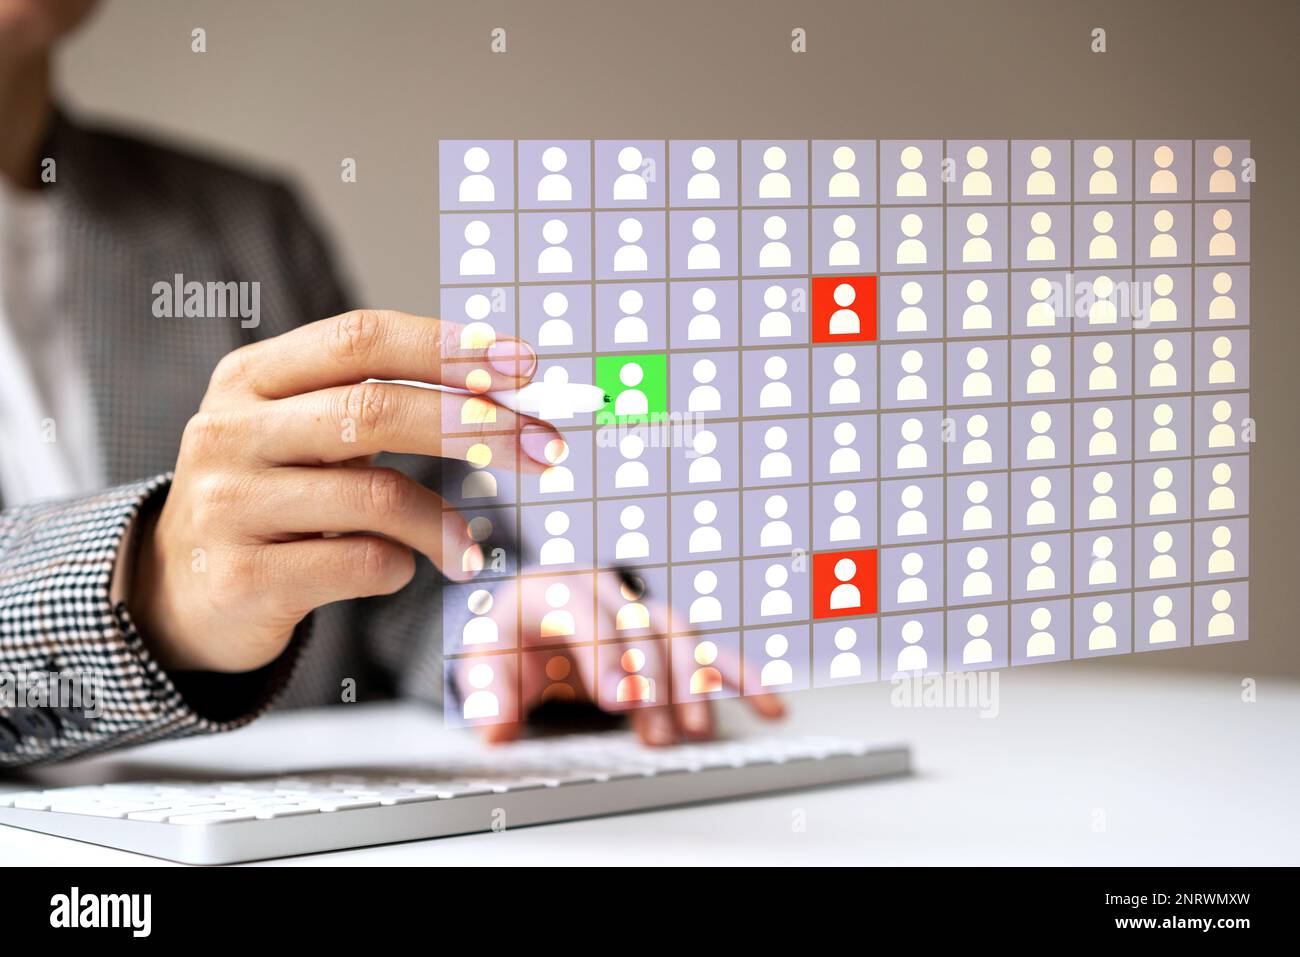 Human resources manager working with digital employee database marking high and low potential employees. Stock Photo